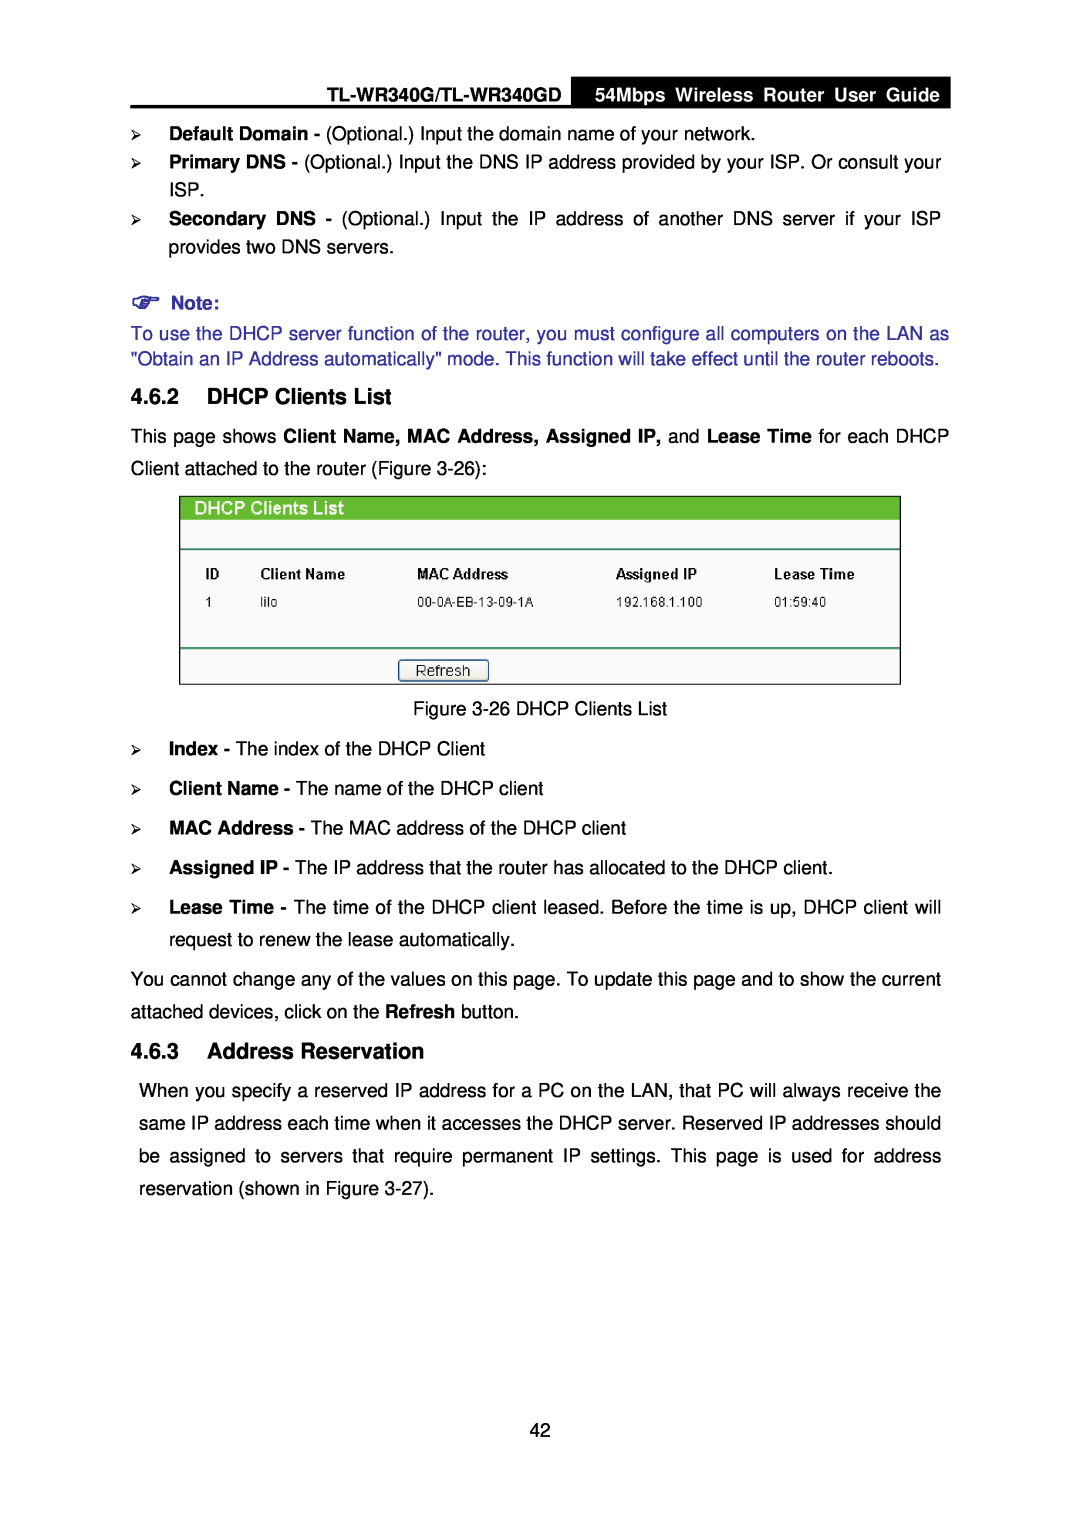 TP-Link manual DHCP Clients List, Address Reservation, TL-WR340G/TL-WR340GD, 54Mbps Wireless Router User Guide 